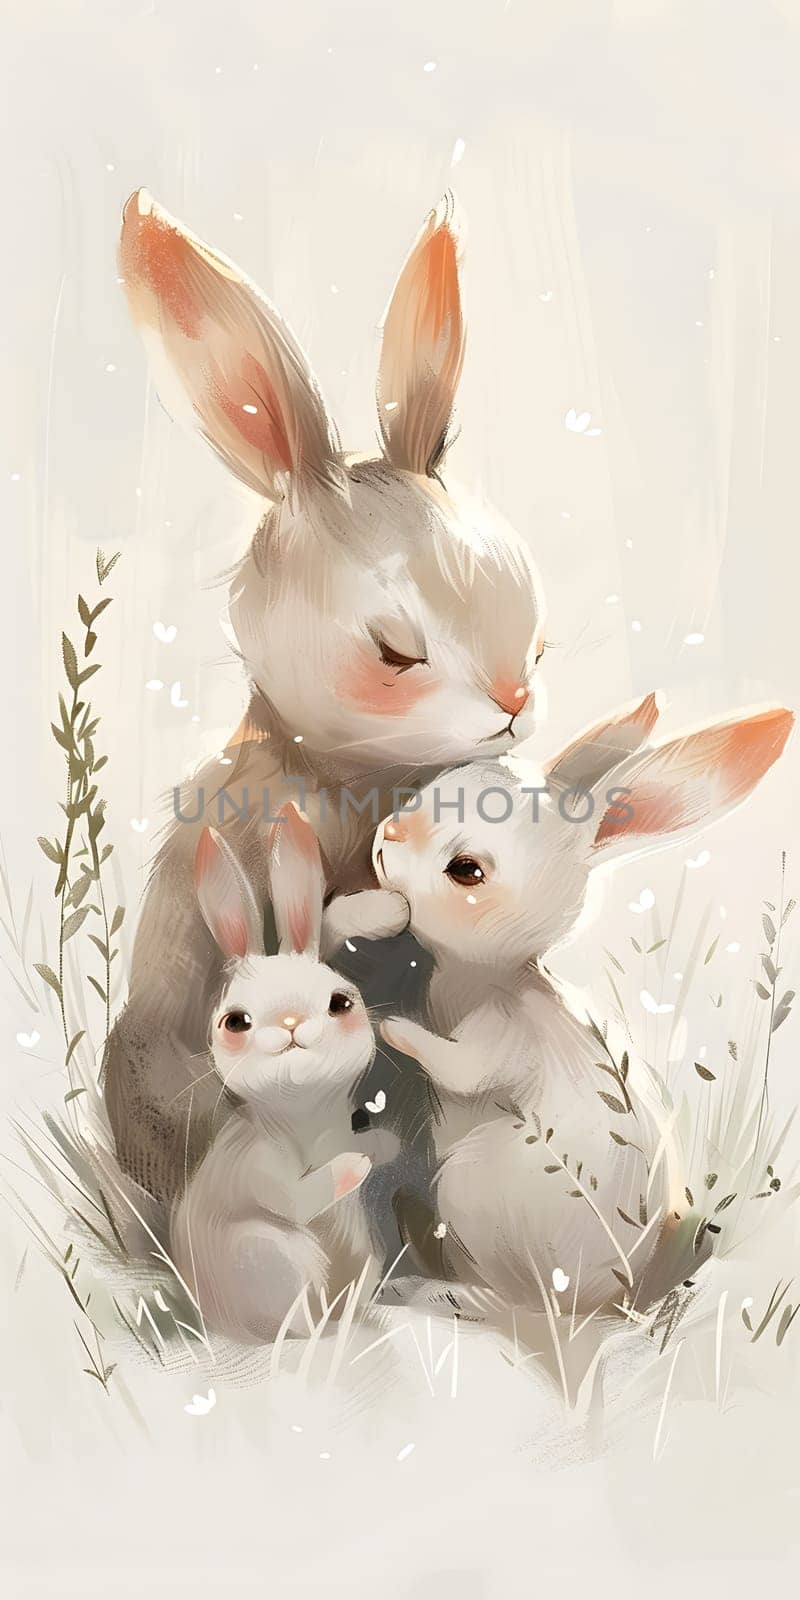 A mother rabbit cradles two baby rabbits in her arms by Nadtochiy